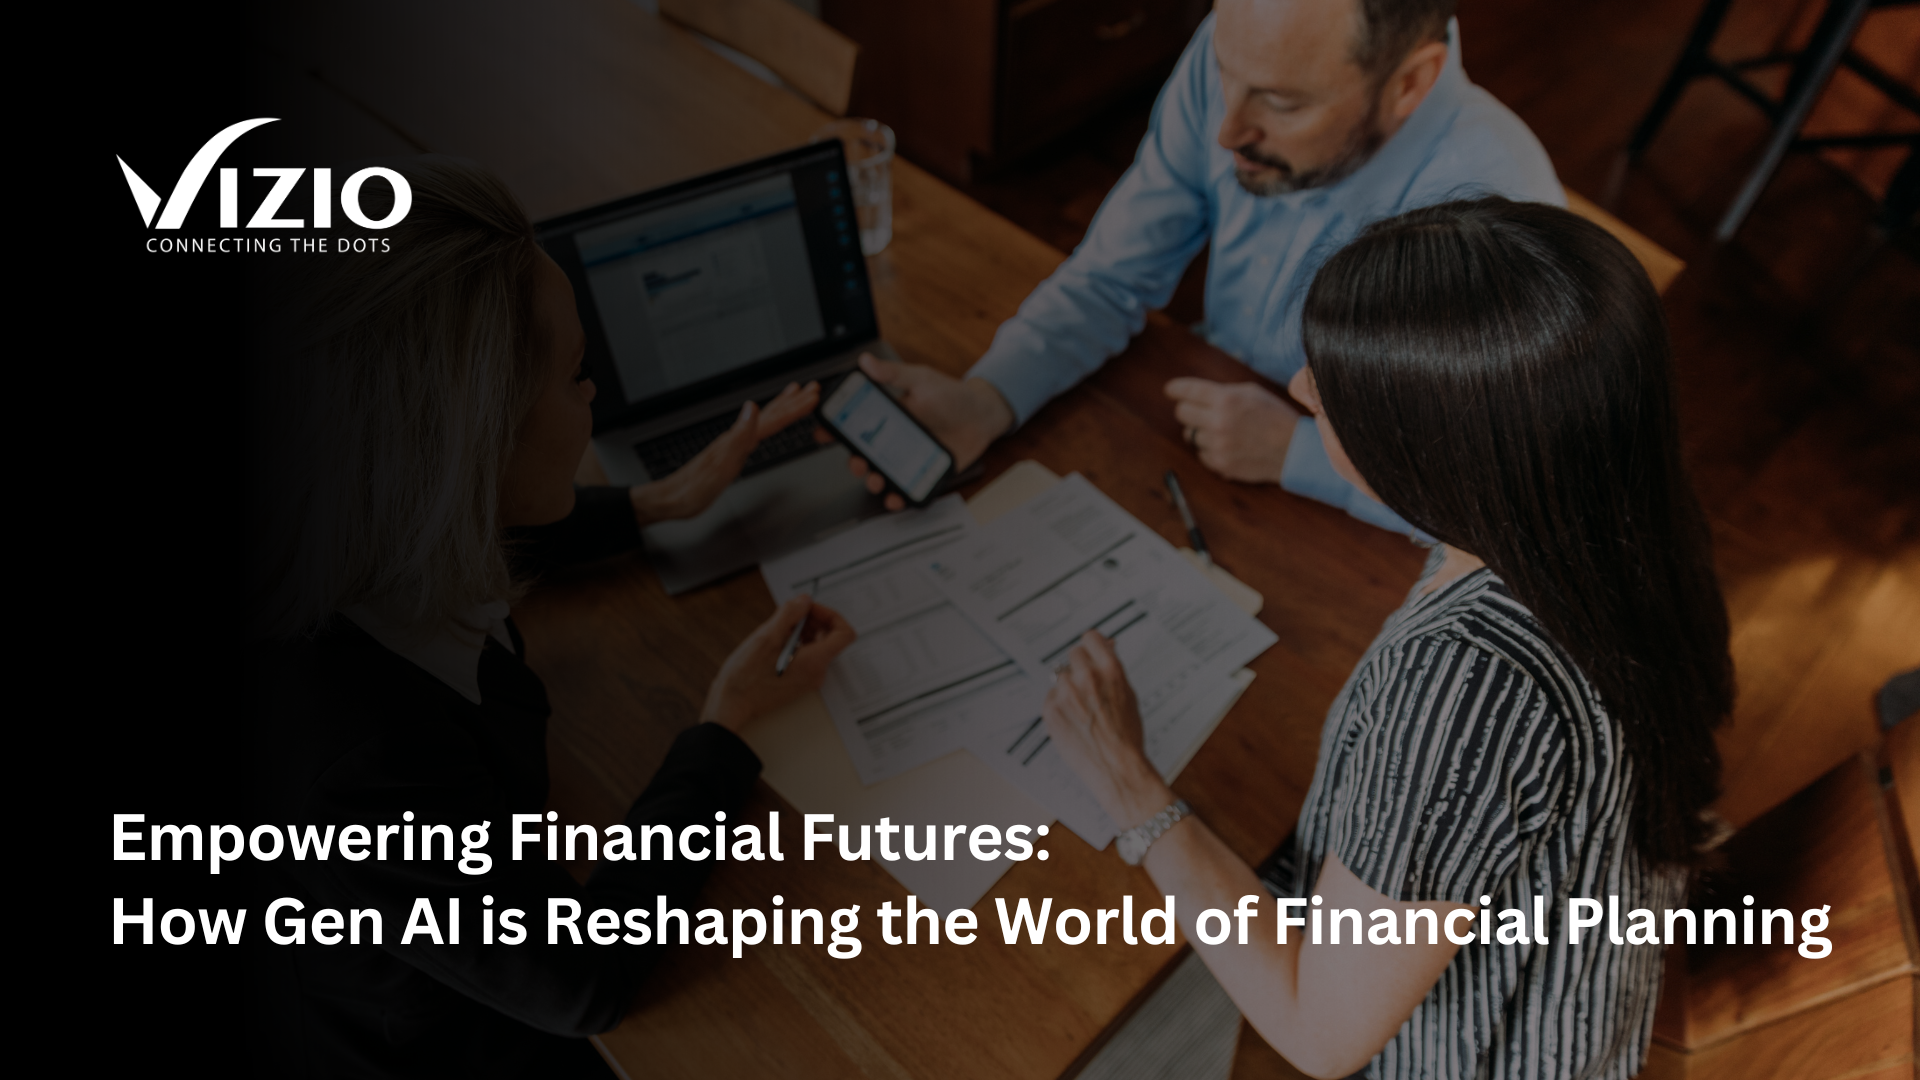 How Gen AI is Reshaping the World of Financial Planning